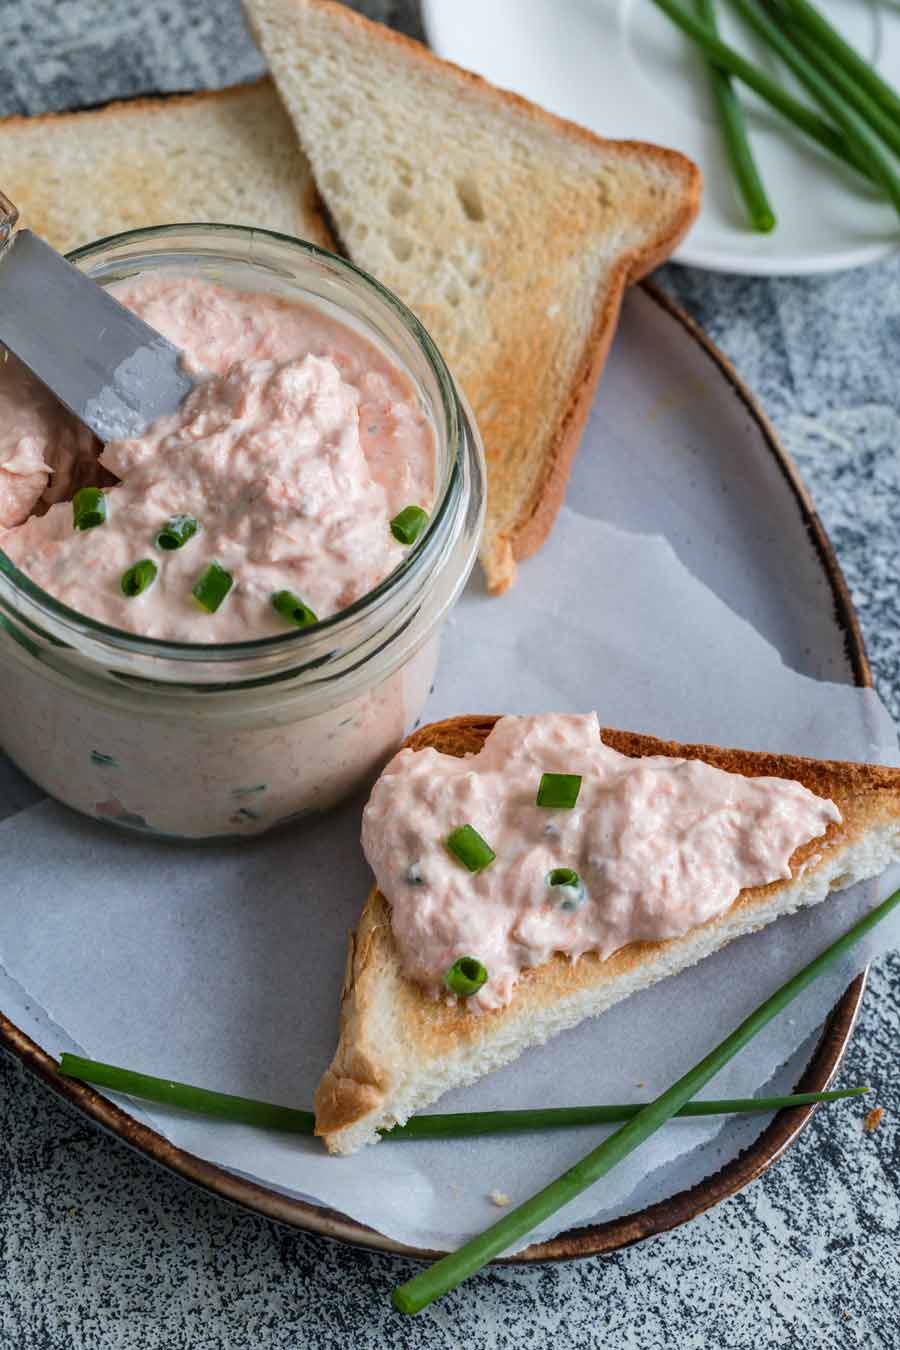 A glass jar filled with salmon cream cheese dip with slices of bread on the side.